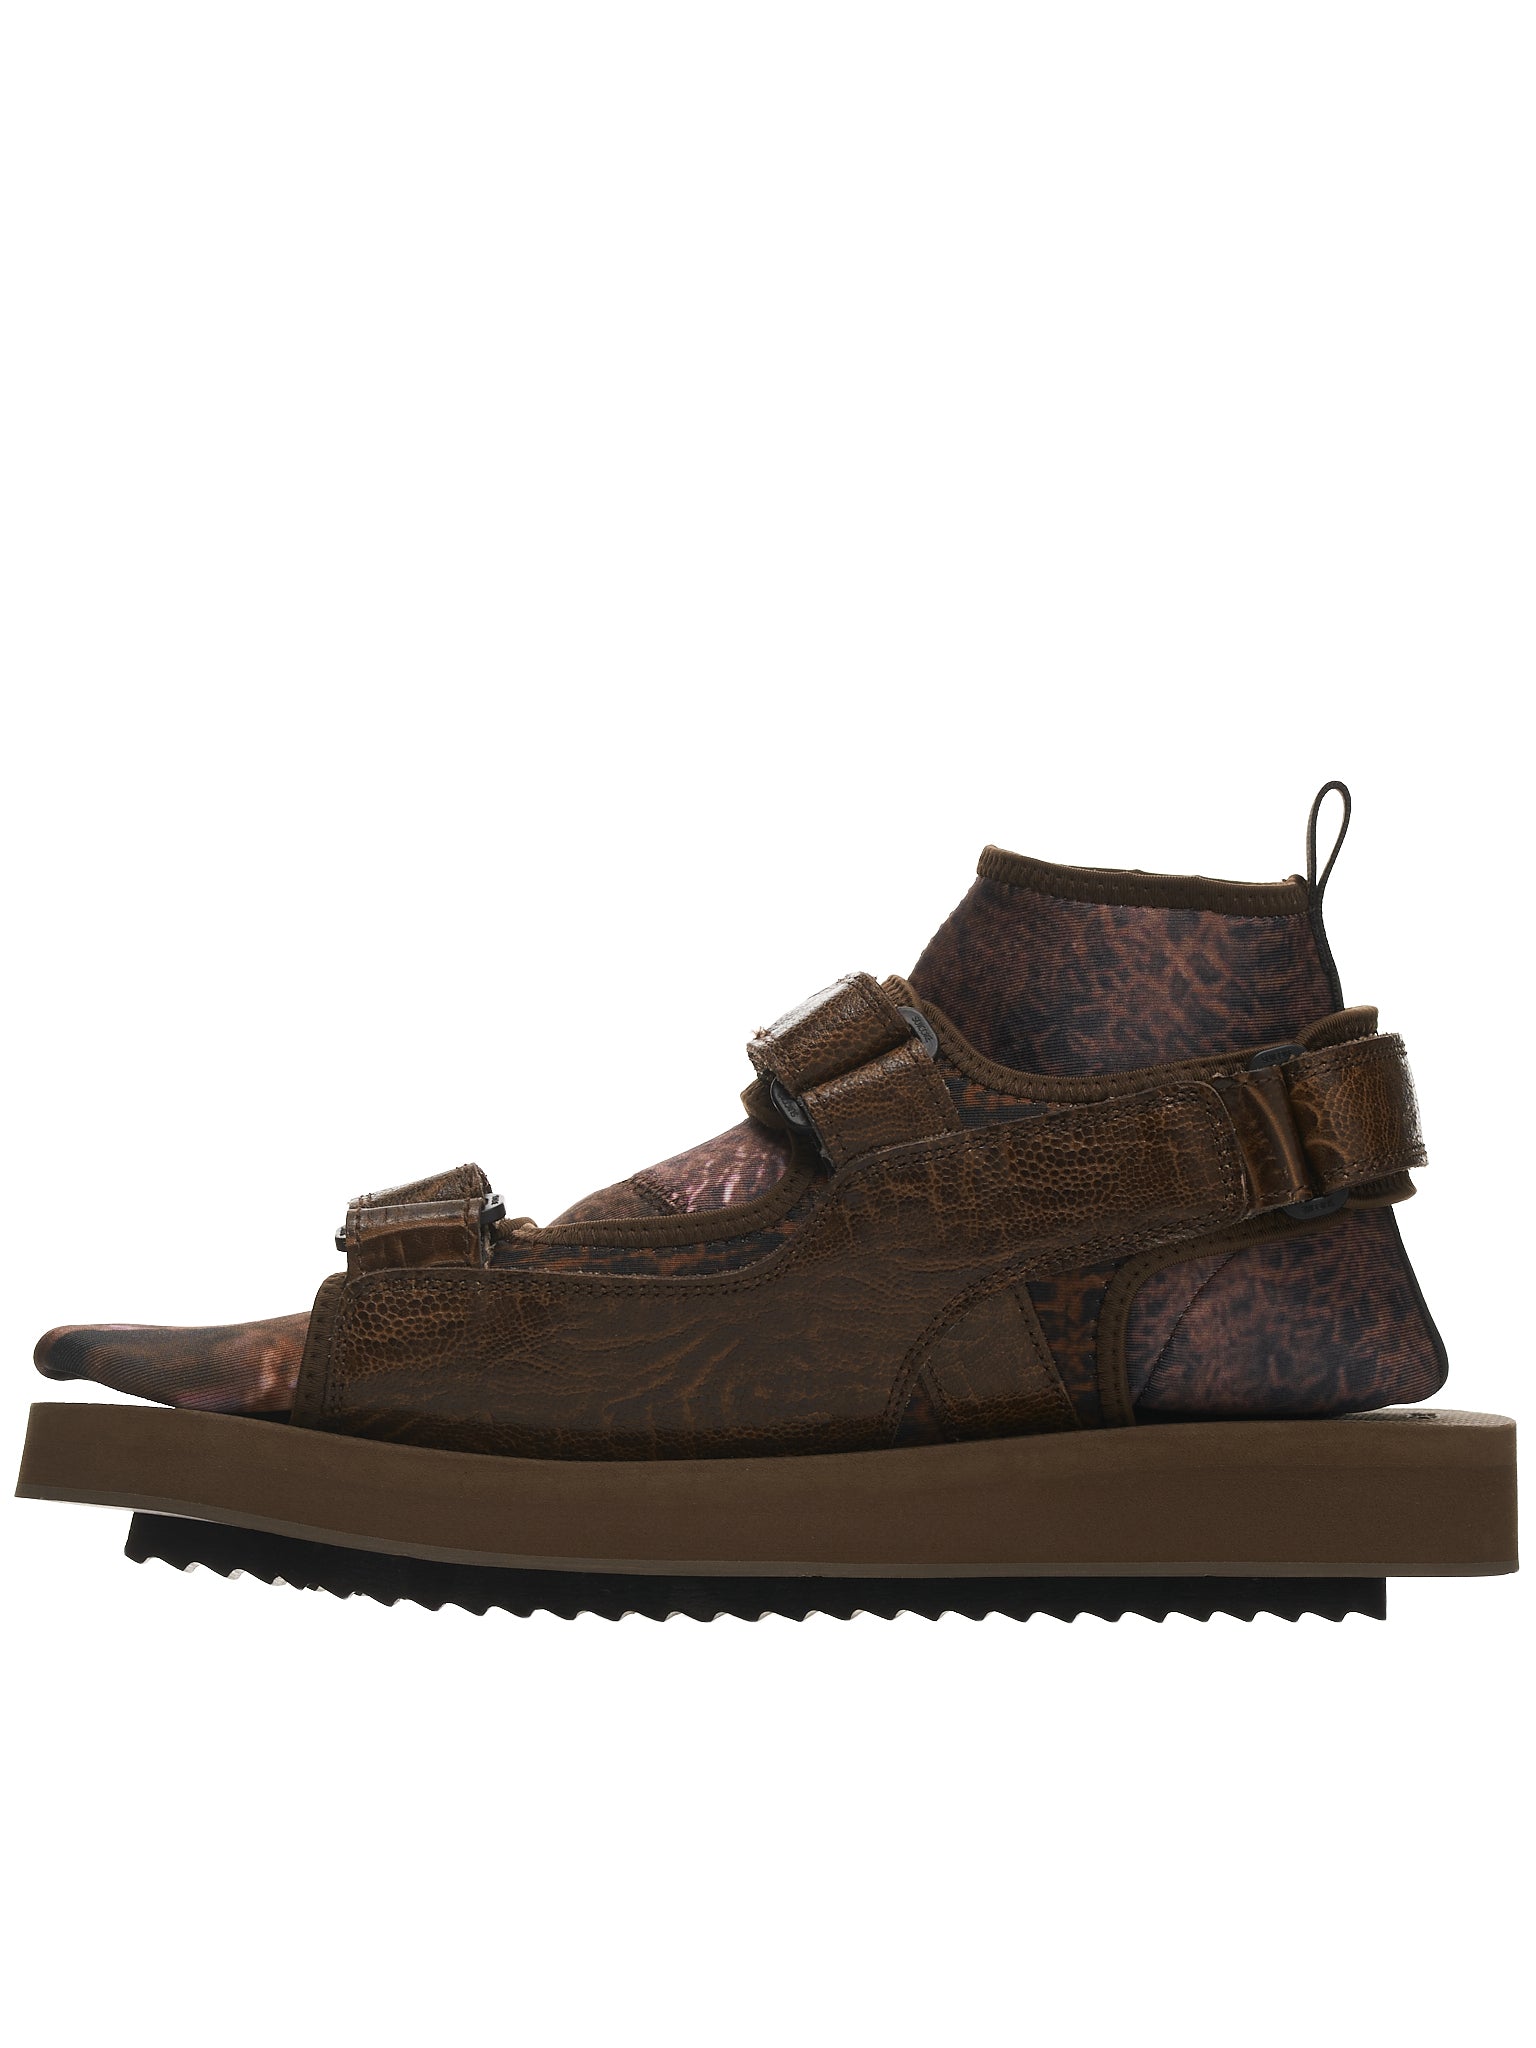 Doublet x Suicoke Animal Foot Layered Sandals | H. Lorenzo - side 2